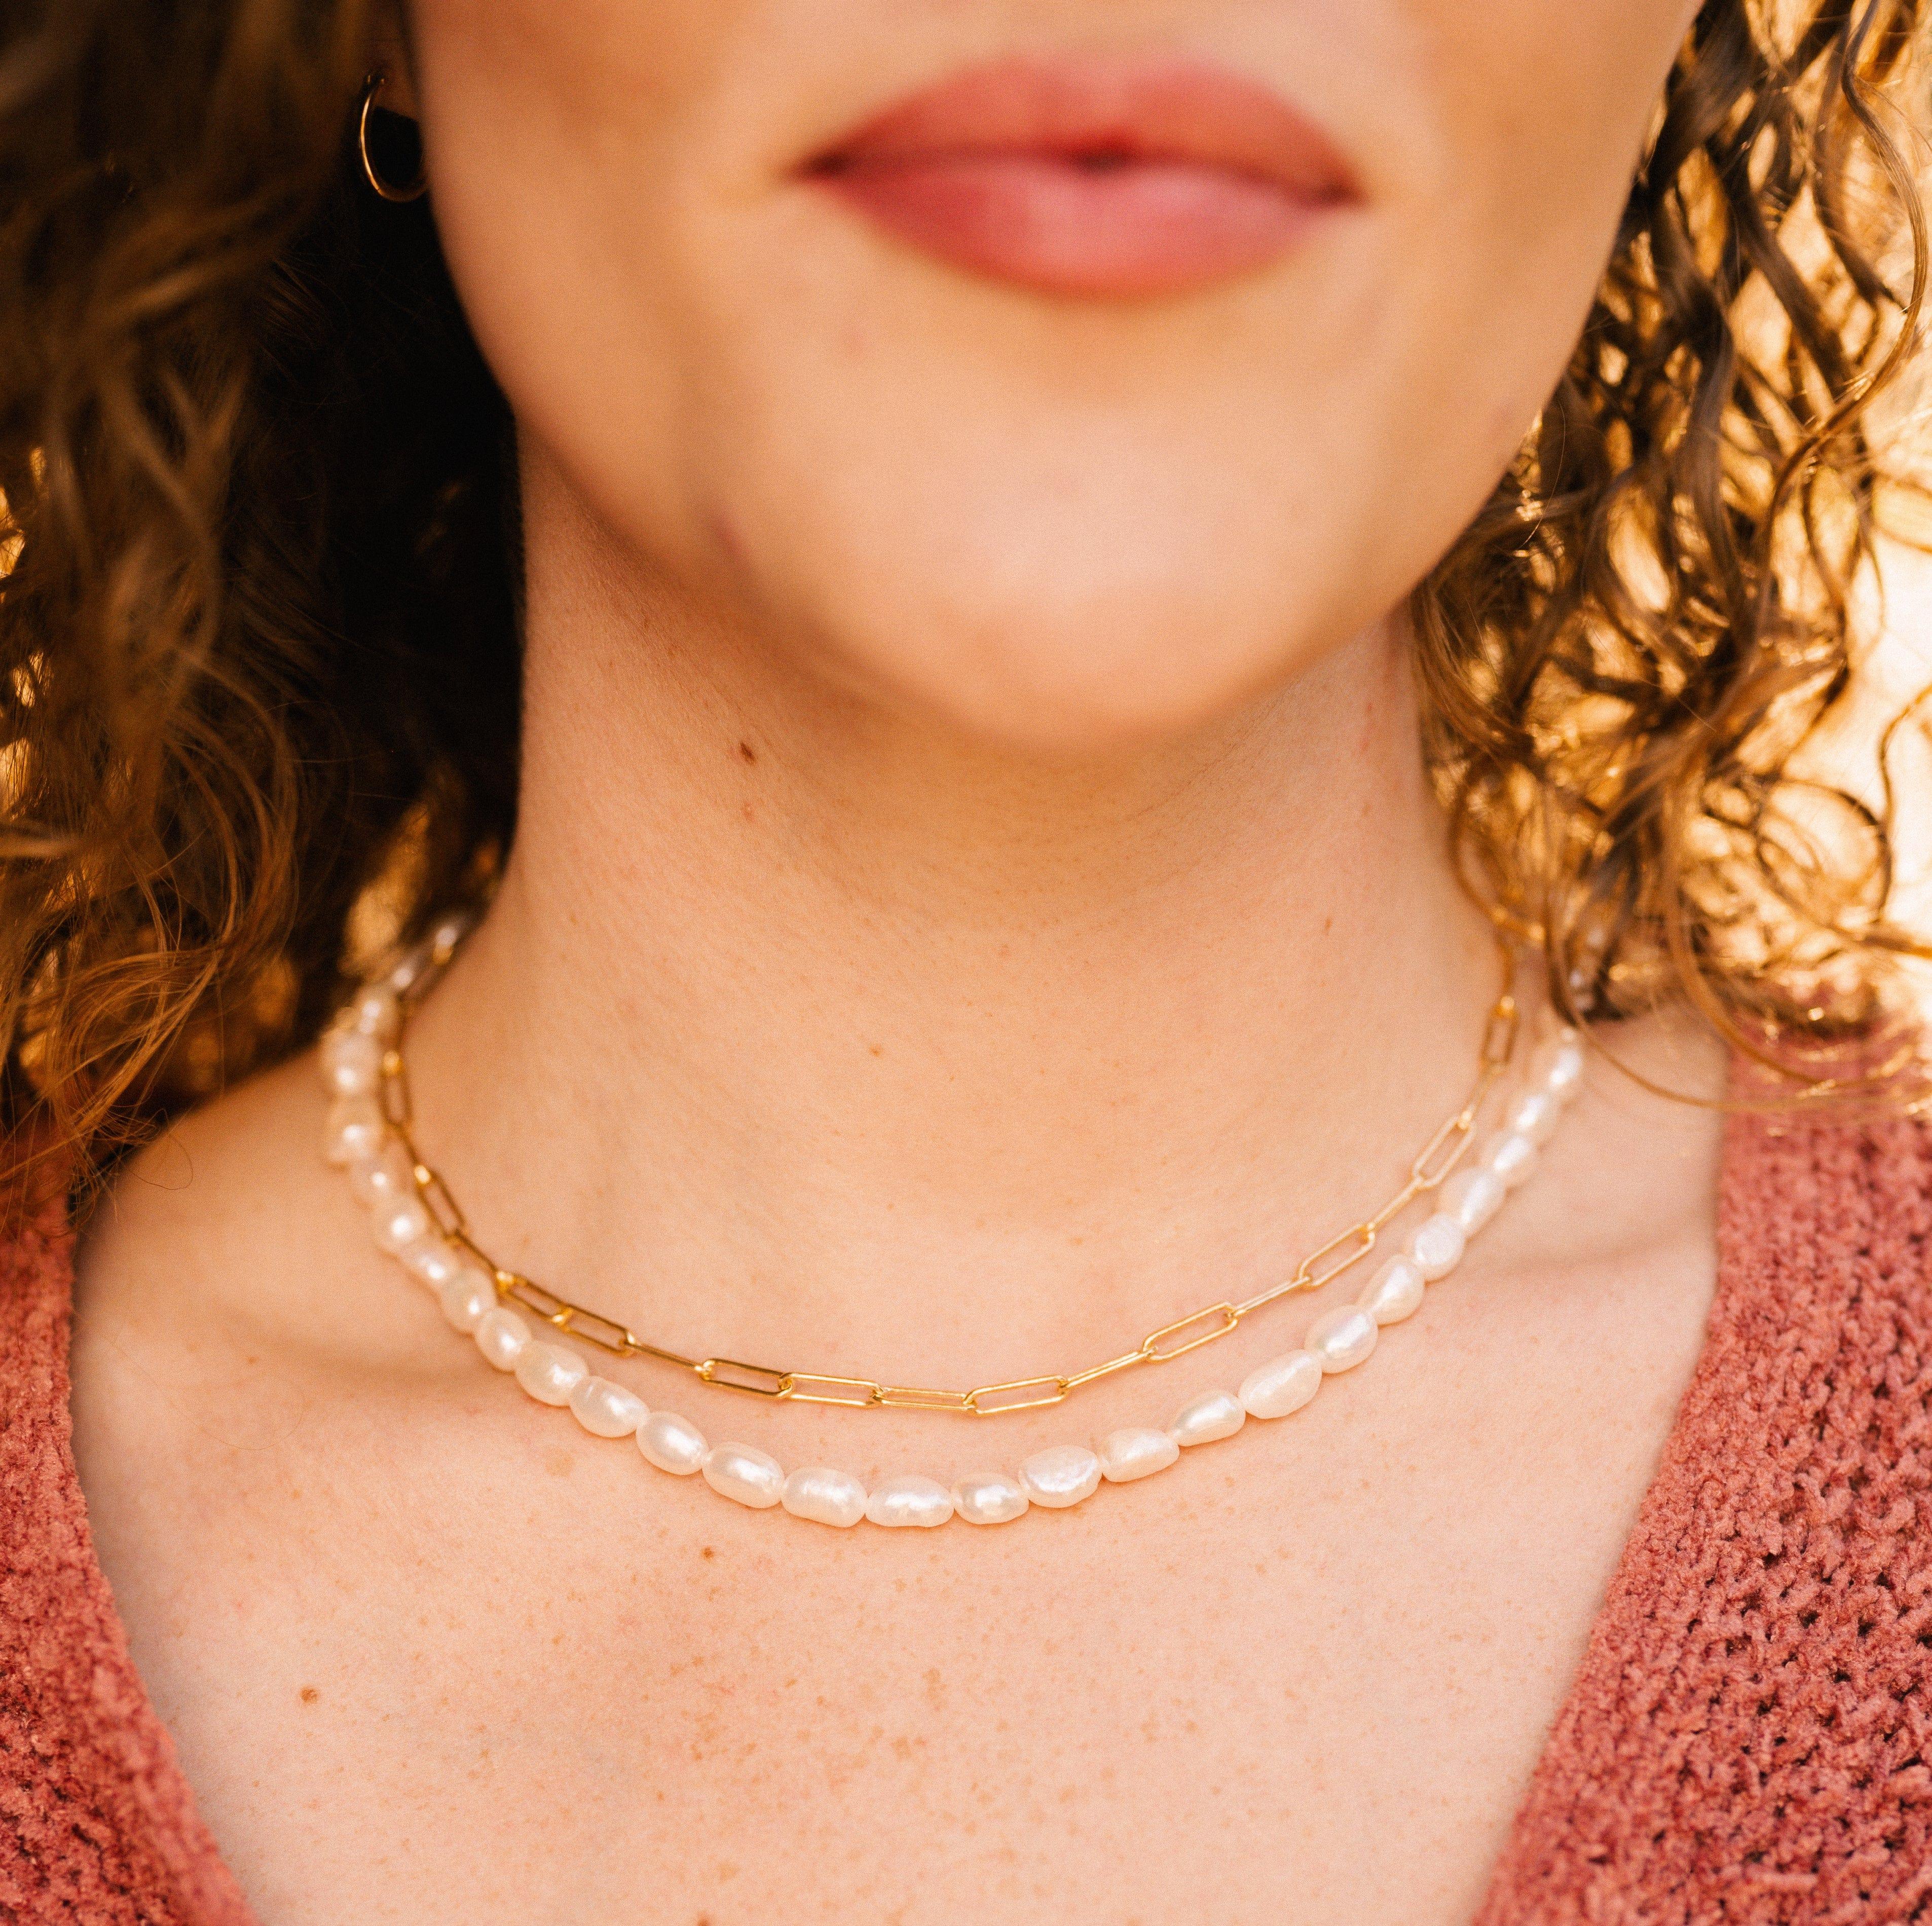 Misfit Pearl Necklace - Nolia Jewelry - Meaningful + Sustainably Handcrafted Jewelry